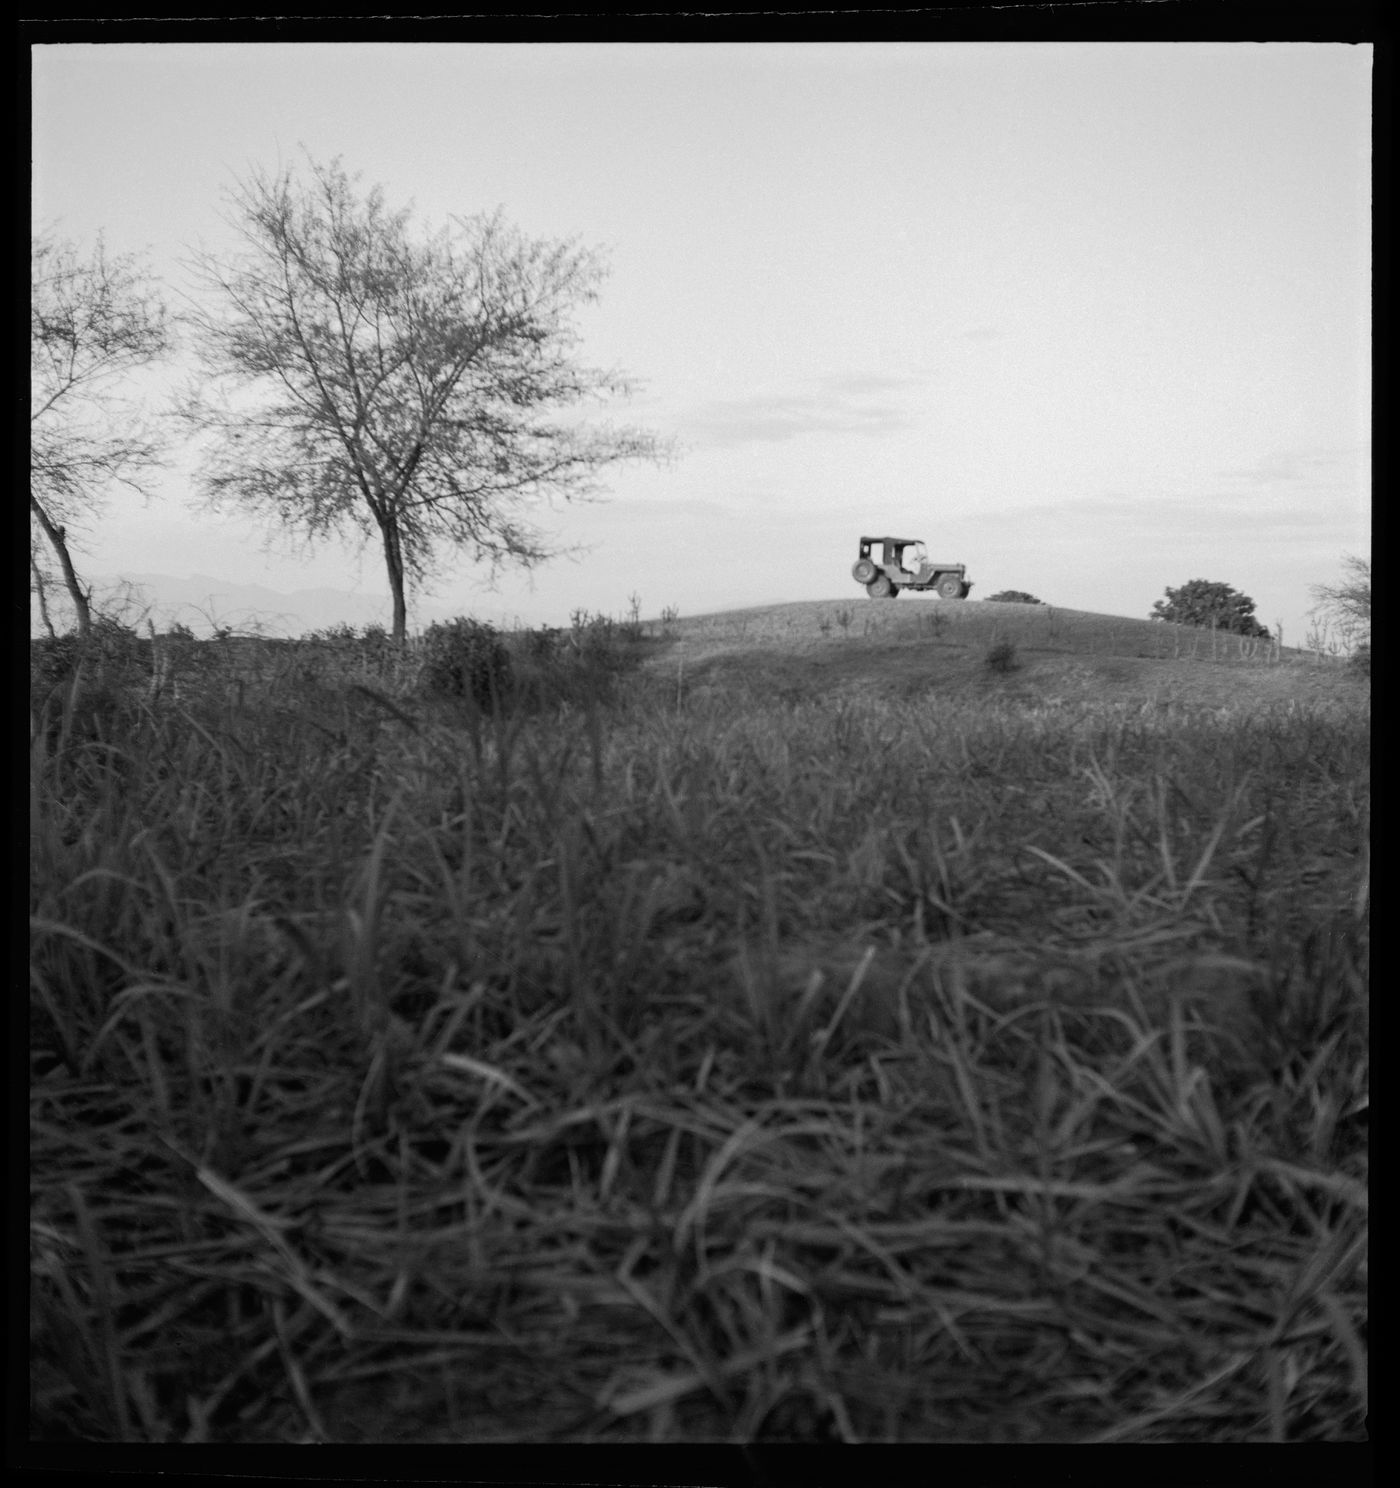 Field with tree and jeep in background, in Chandigarh, India